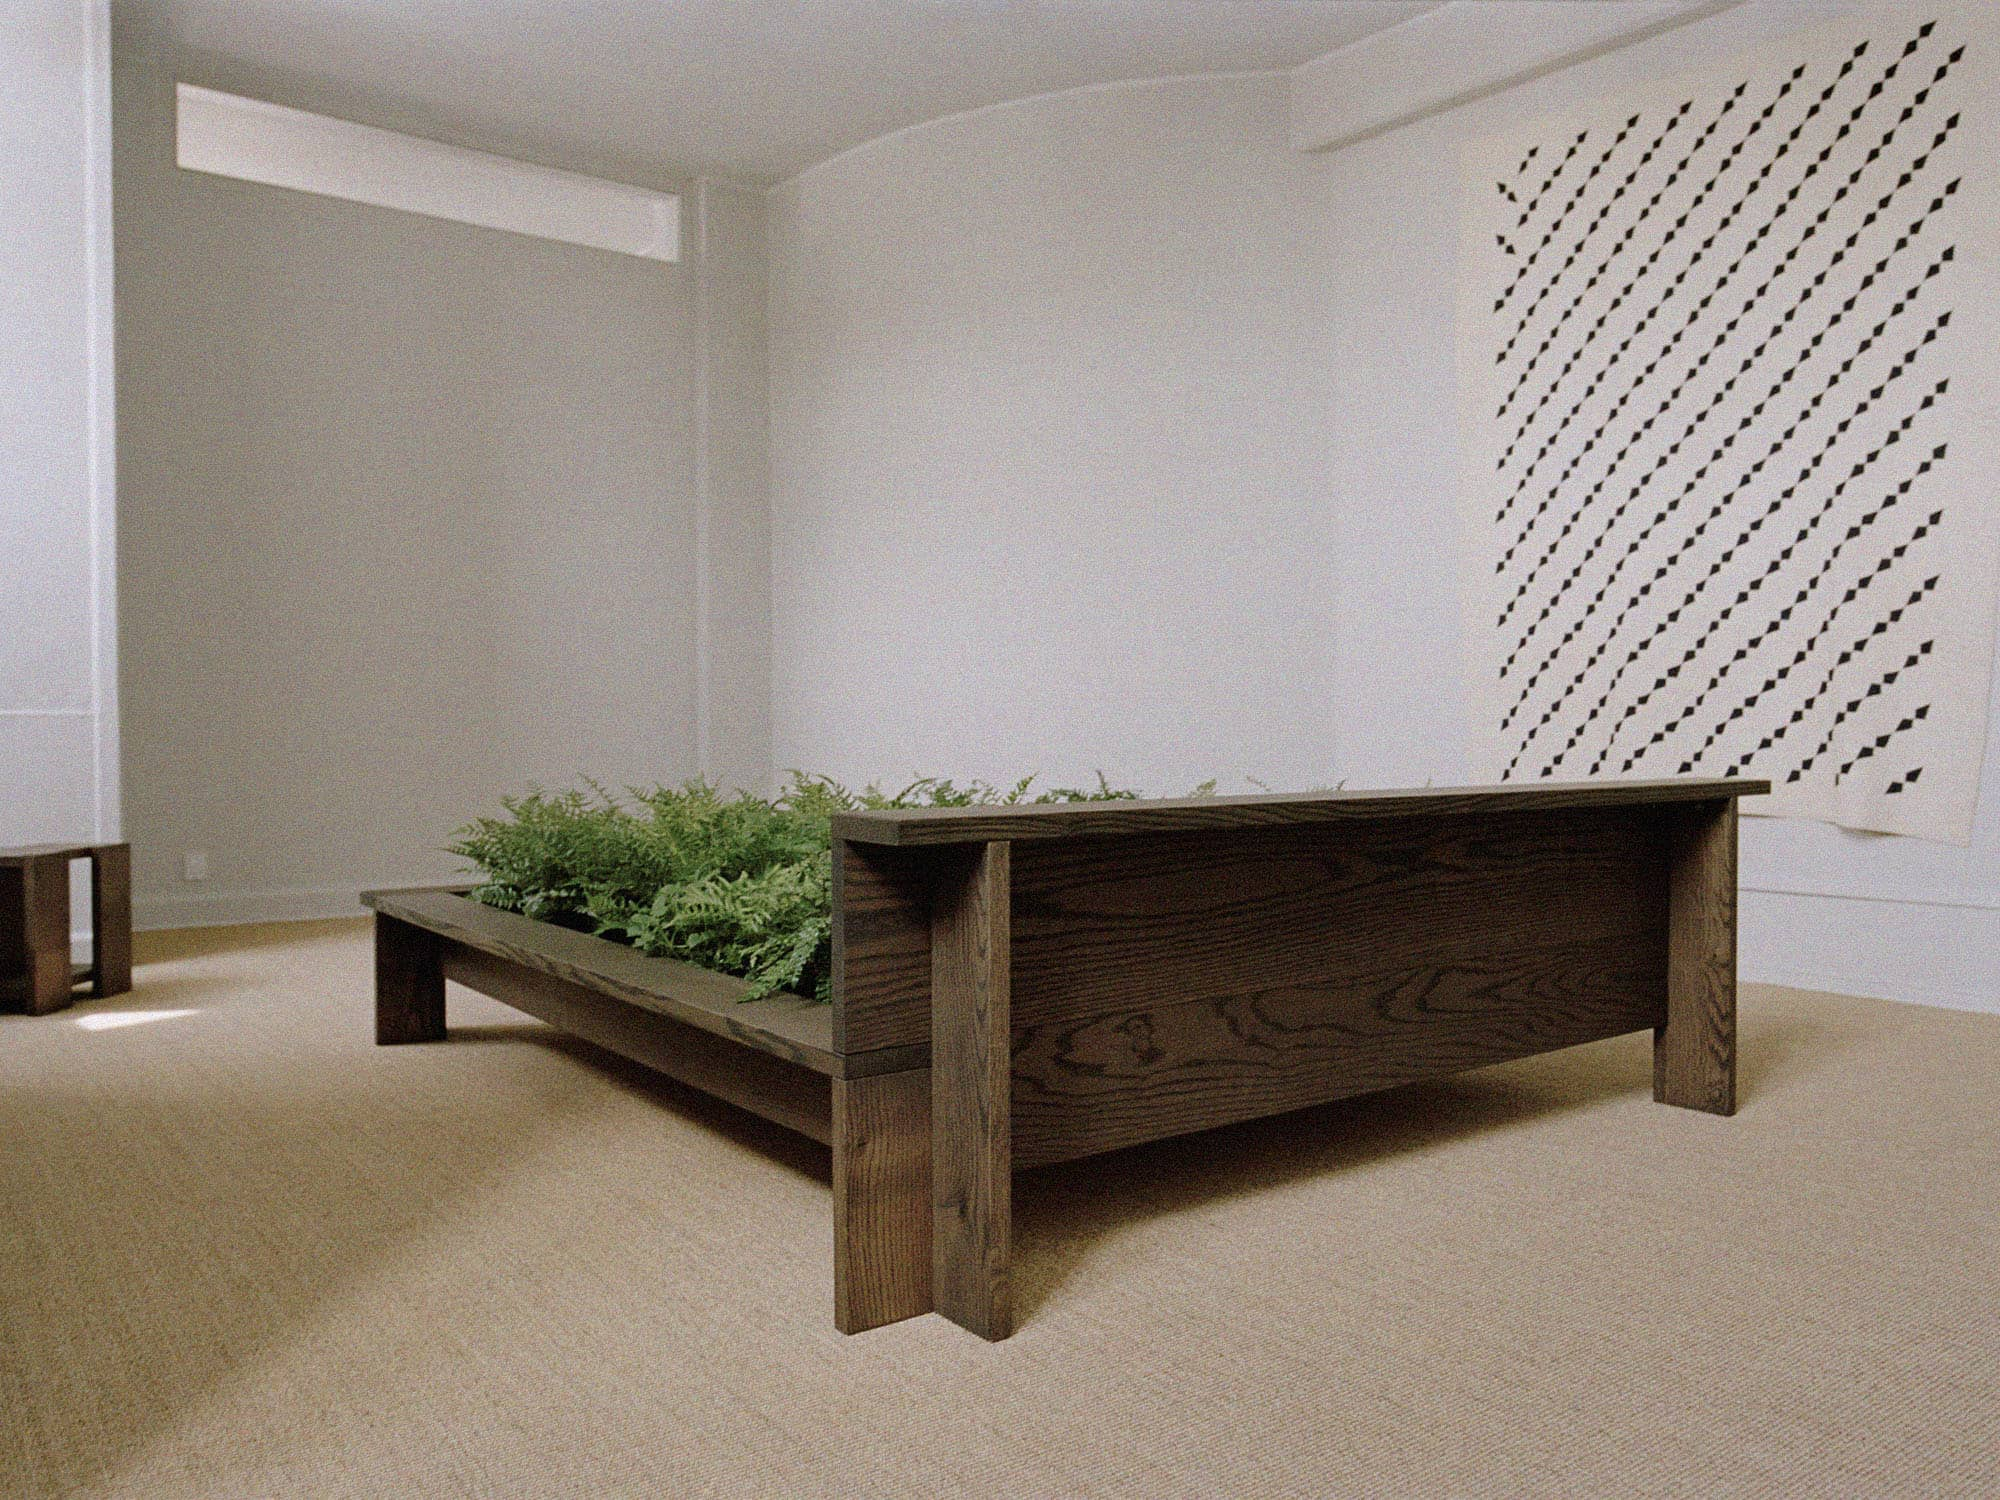 rye-hem-smoked-red-oak-bed-frame-with-ferns-in-showroom-cph